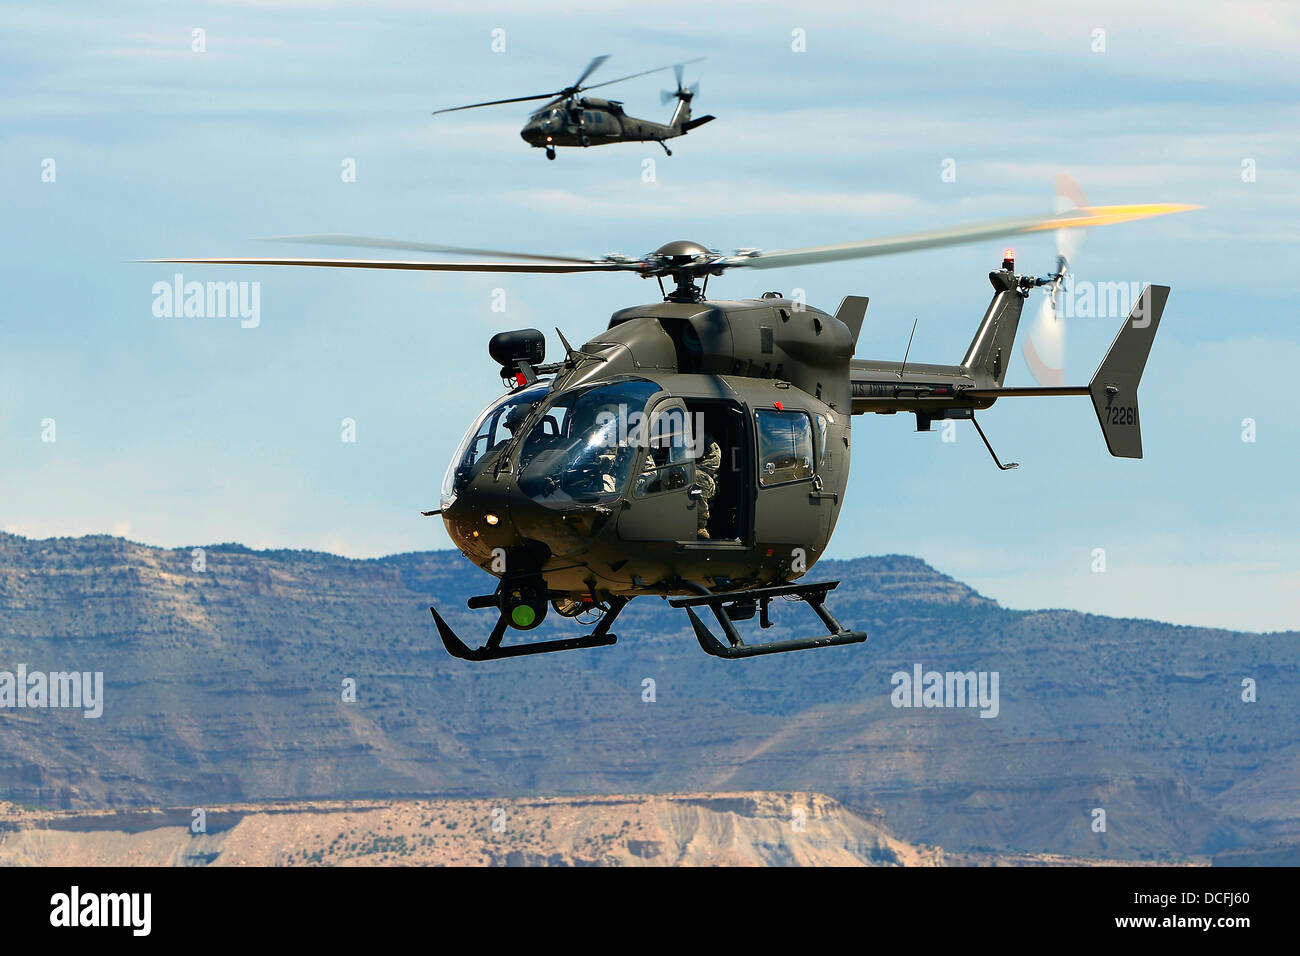 US Army UH-72 Lakota helicopter flies along with a UH-60 Black Hawk helicopter July 29, 2013 over Grand Junction, CO. Stock Photo